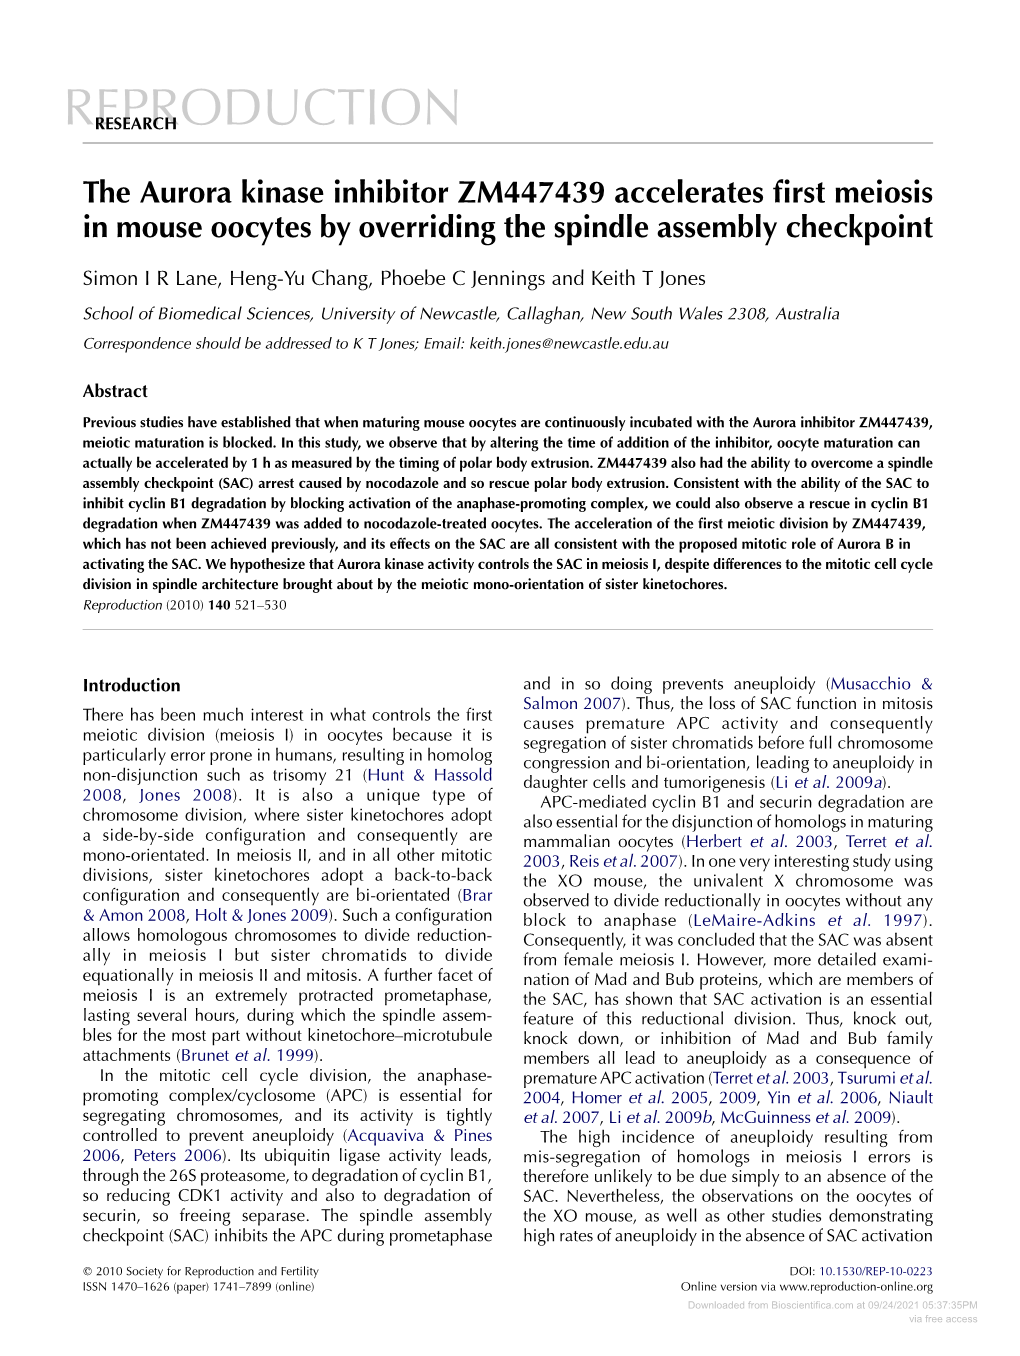 The Aurora Kinase Inhibitor ZM447439 Accelerates First Meiosis in Mouse